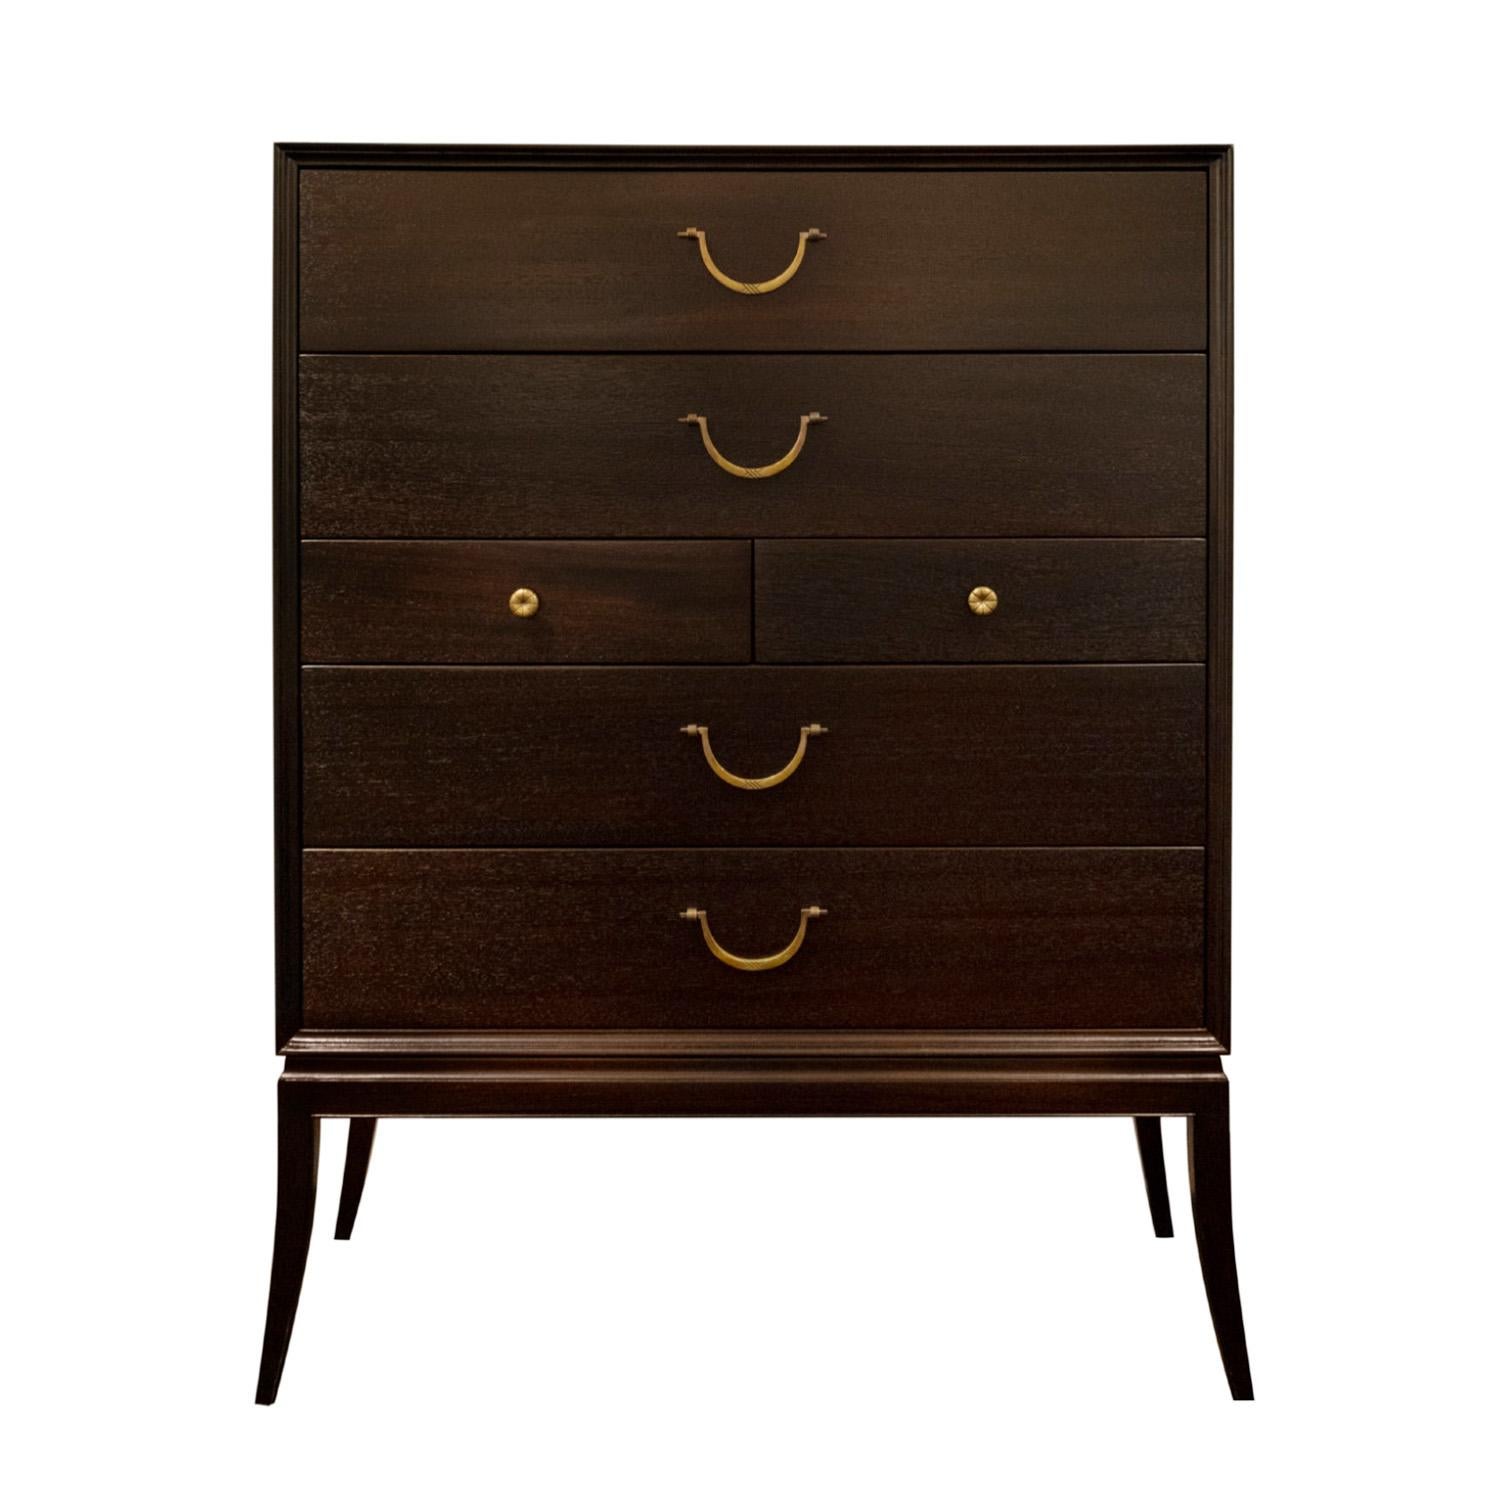 Superbly crafted tall chest of drawers model M603 in mahogany with tapering legs and etched brass pulls by Tommi Parzinger for Charak Modern, American 1950's (signed 